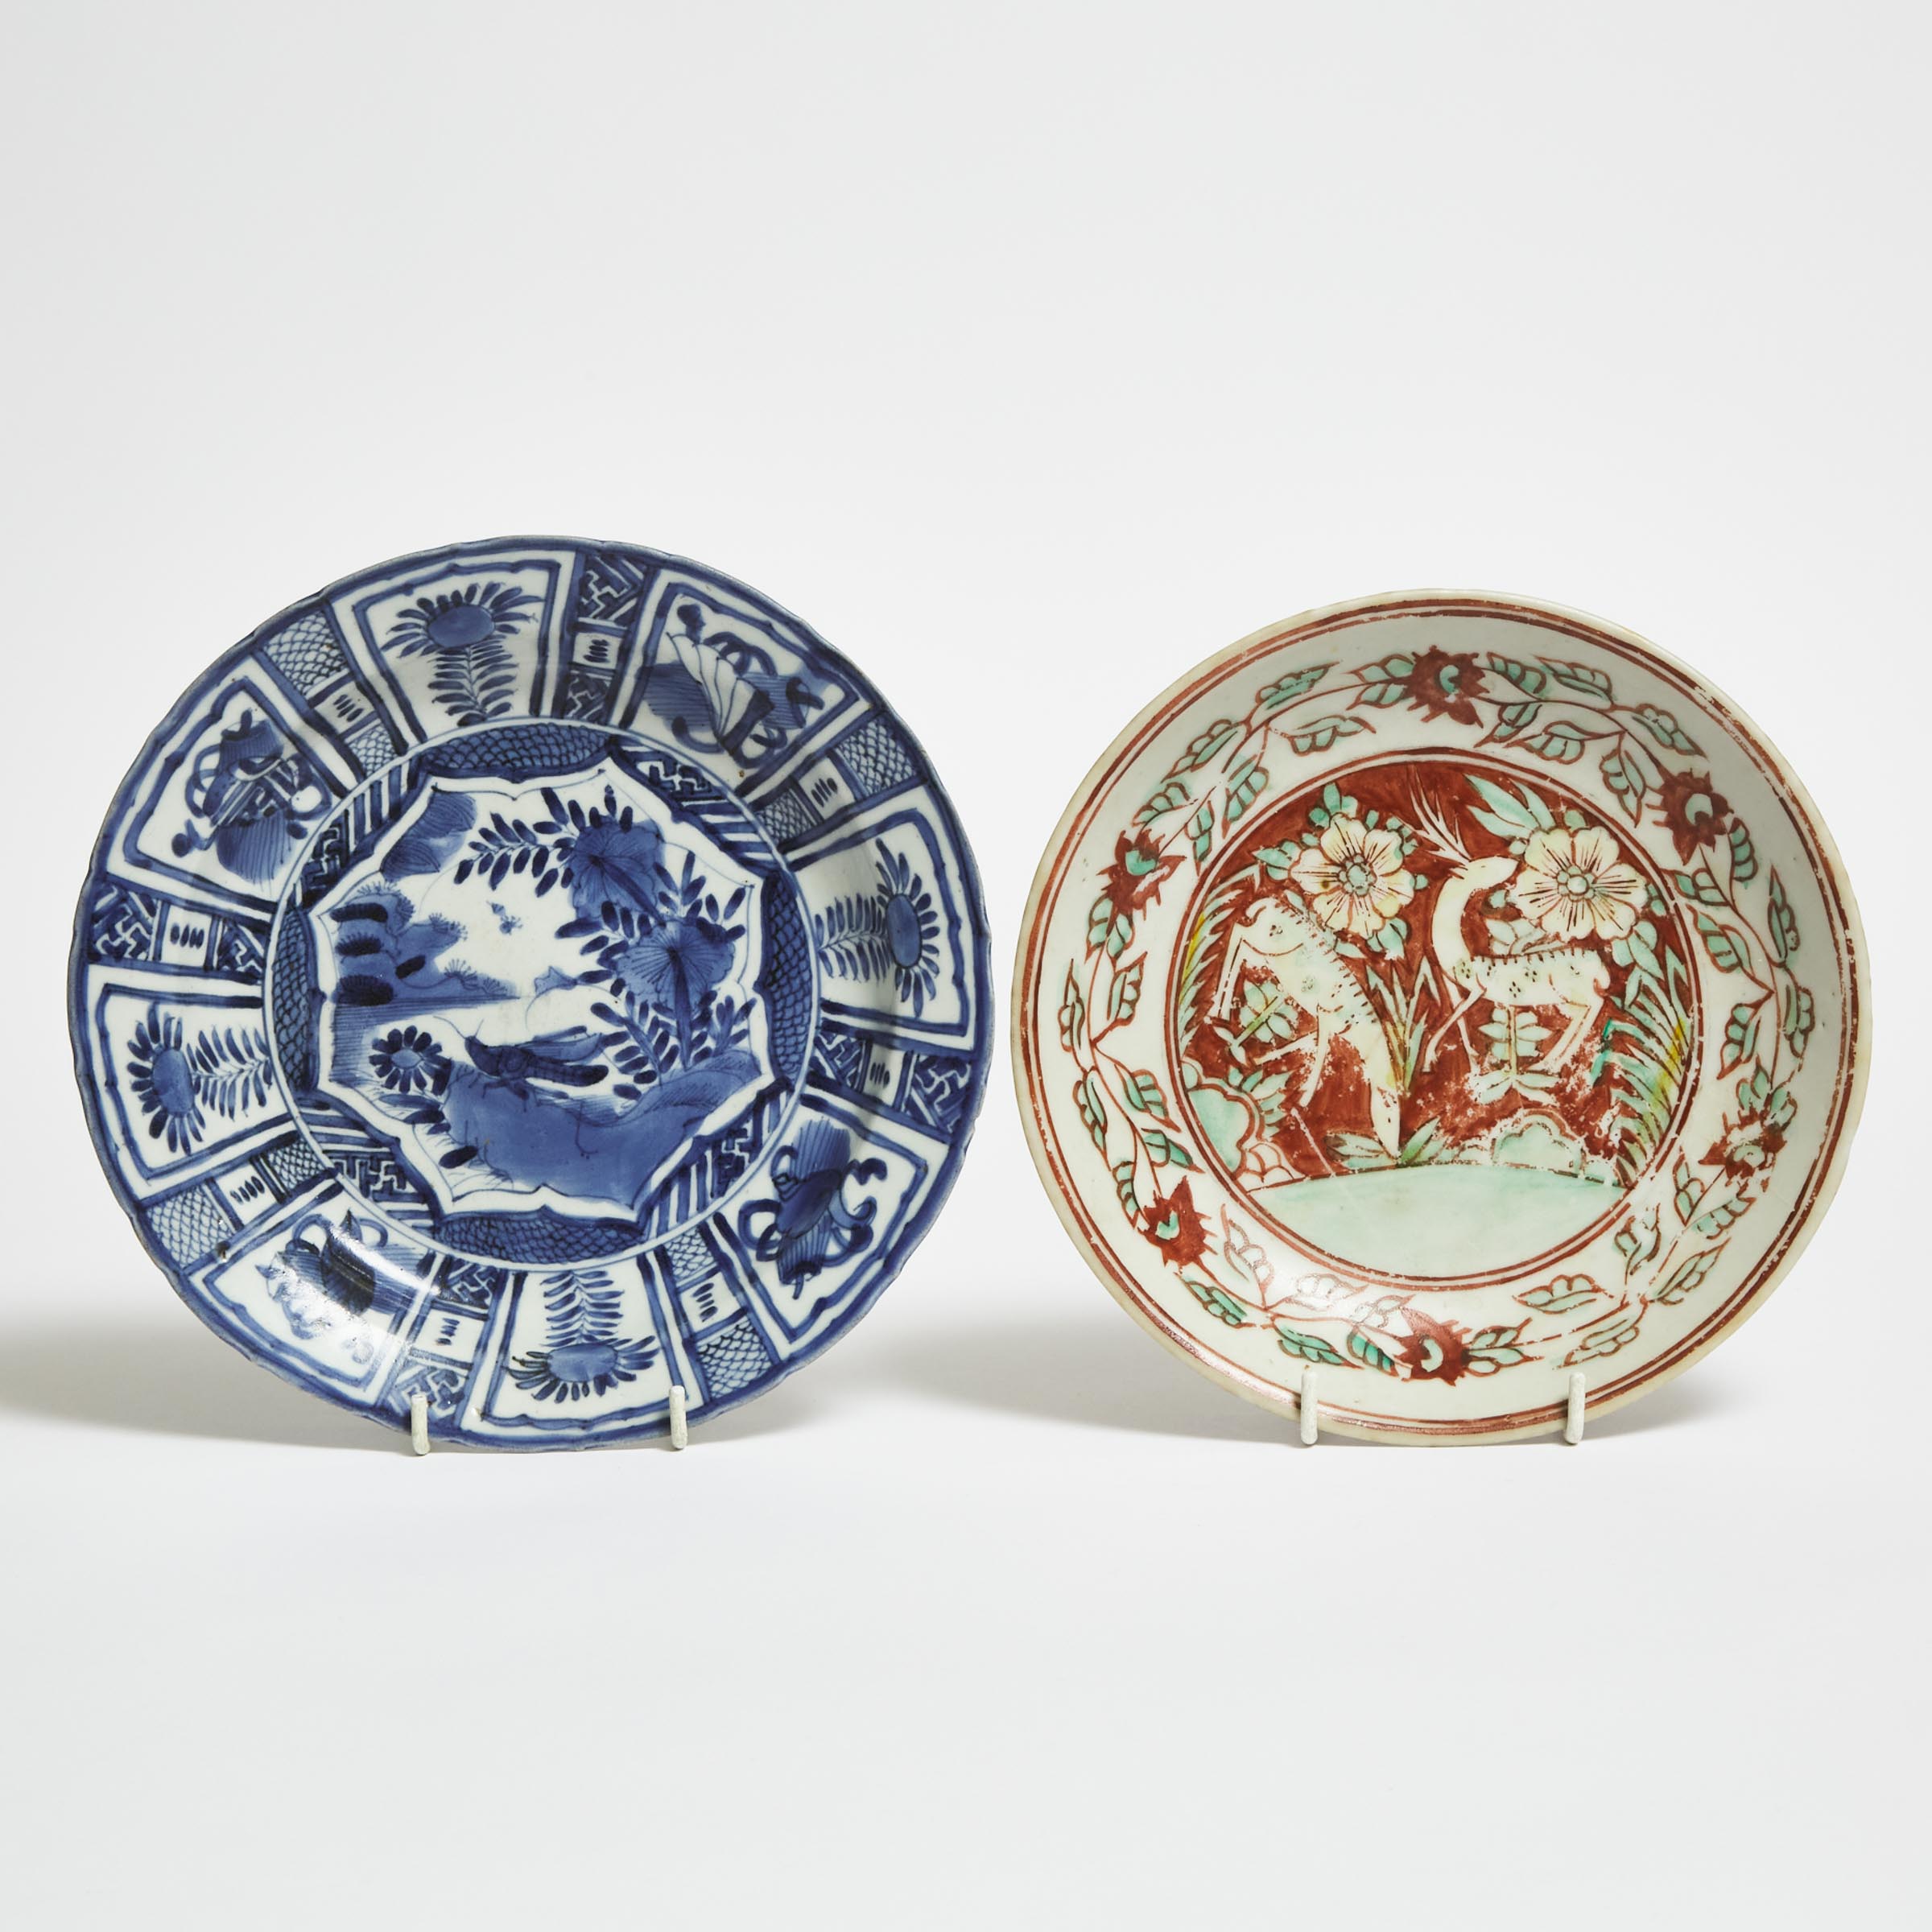 A Blue and White 'Kraak' Dish, Together With a Polychrome-Enameled Annamese Dish, 16th/17th Century